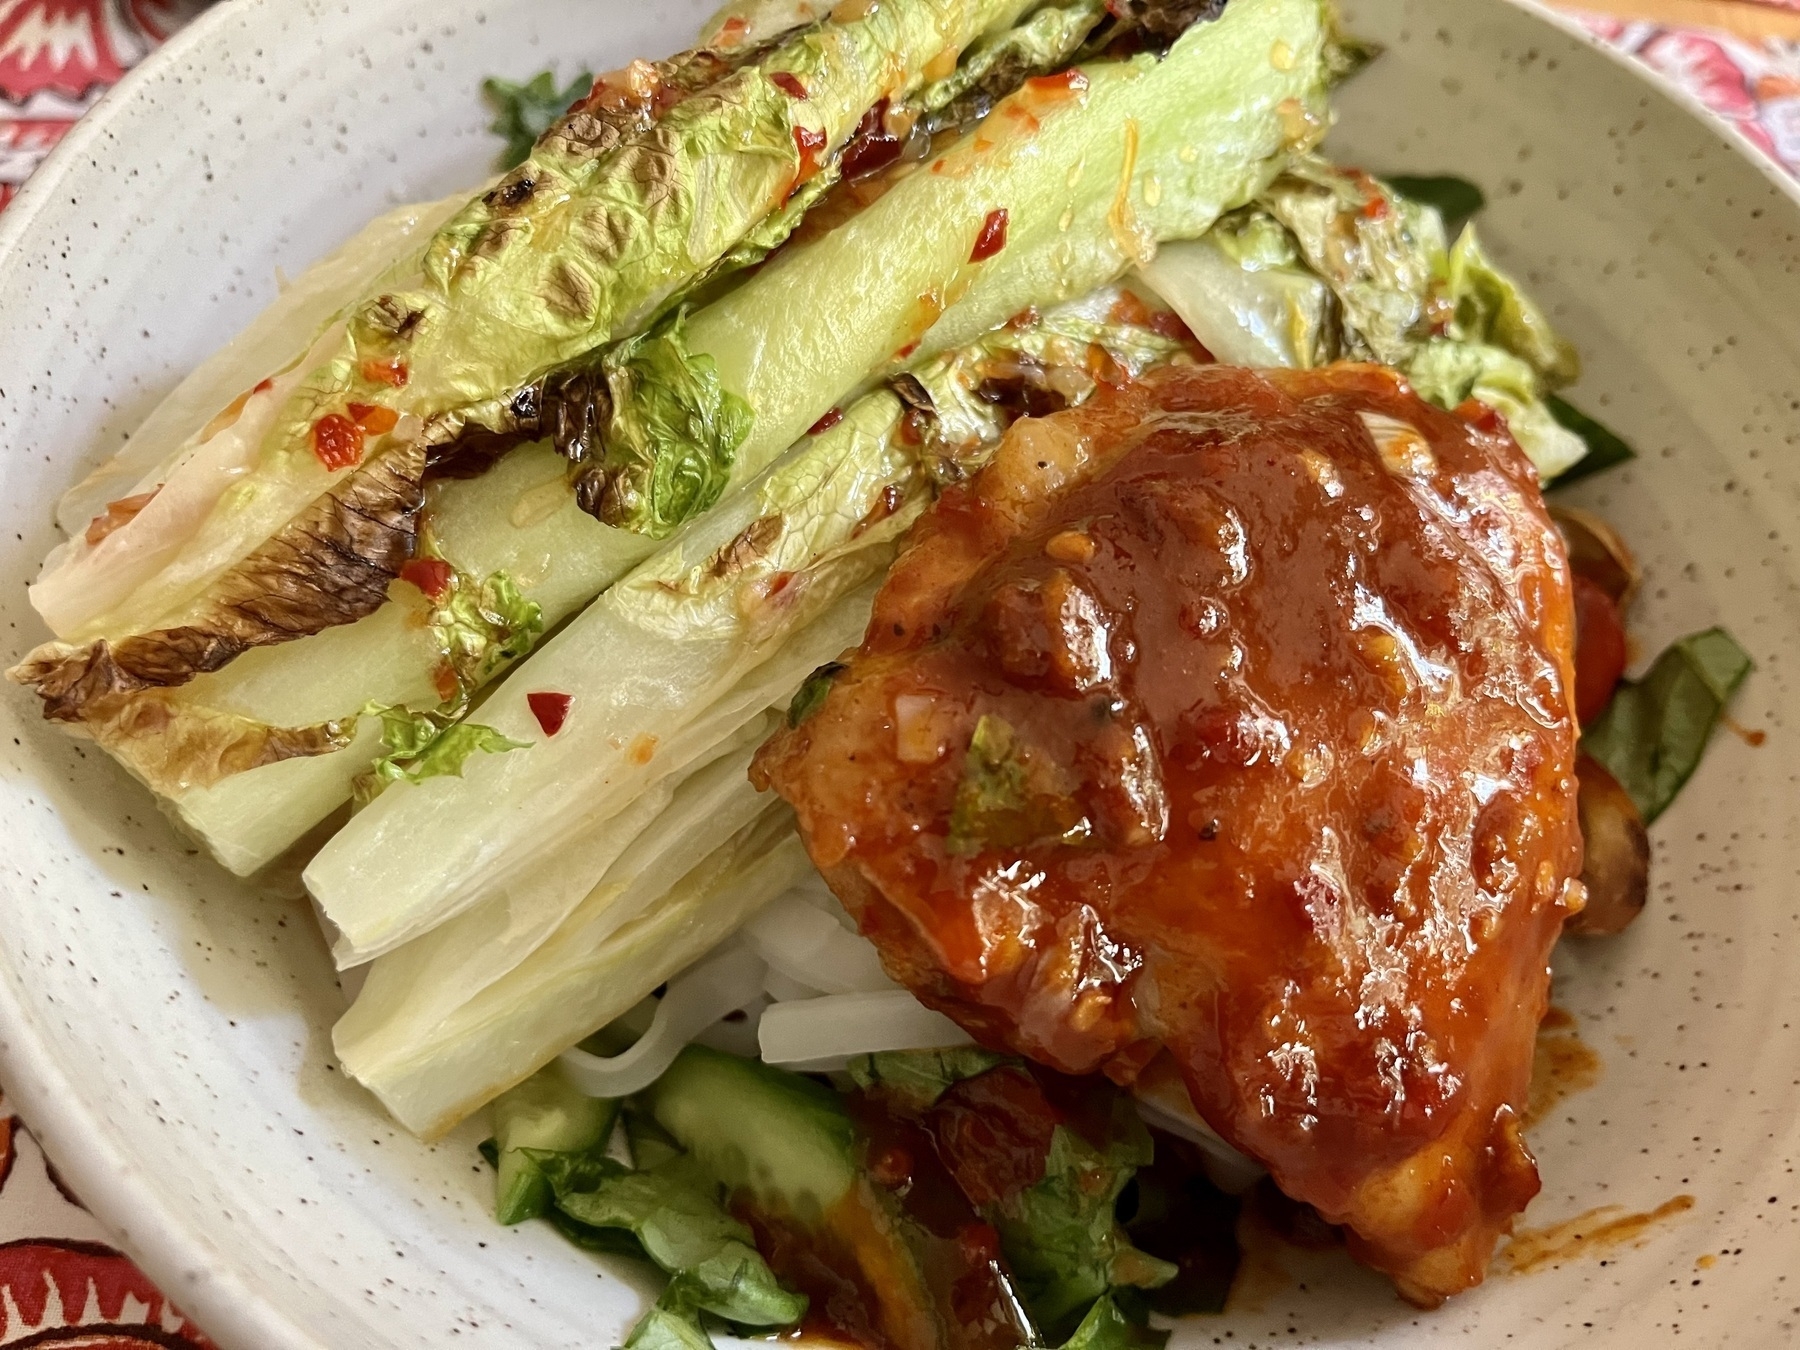 Grilled Romaine with Korean spicy chicken and rice noodles